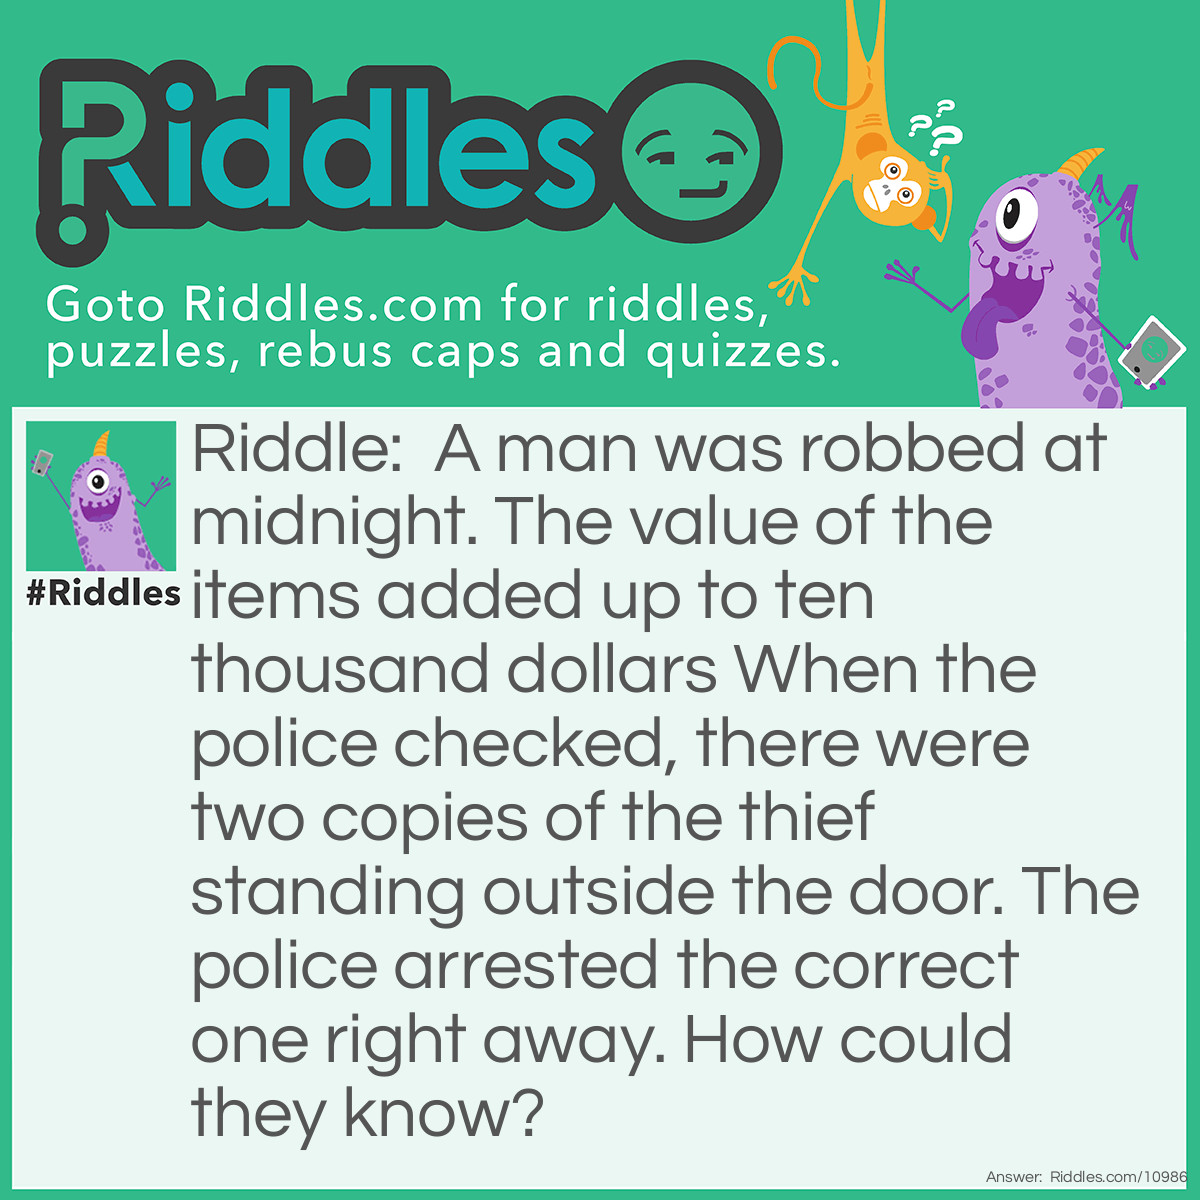 Riddle: A man was robbed at midnight. The value of the items added up to ten thousand dollars When the police checked, there were two copies of the thief standing outside the door. The police arrested the correct one right away. How could they know? Answer: The thief stole money. It was falling out of his pockets.